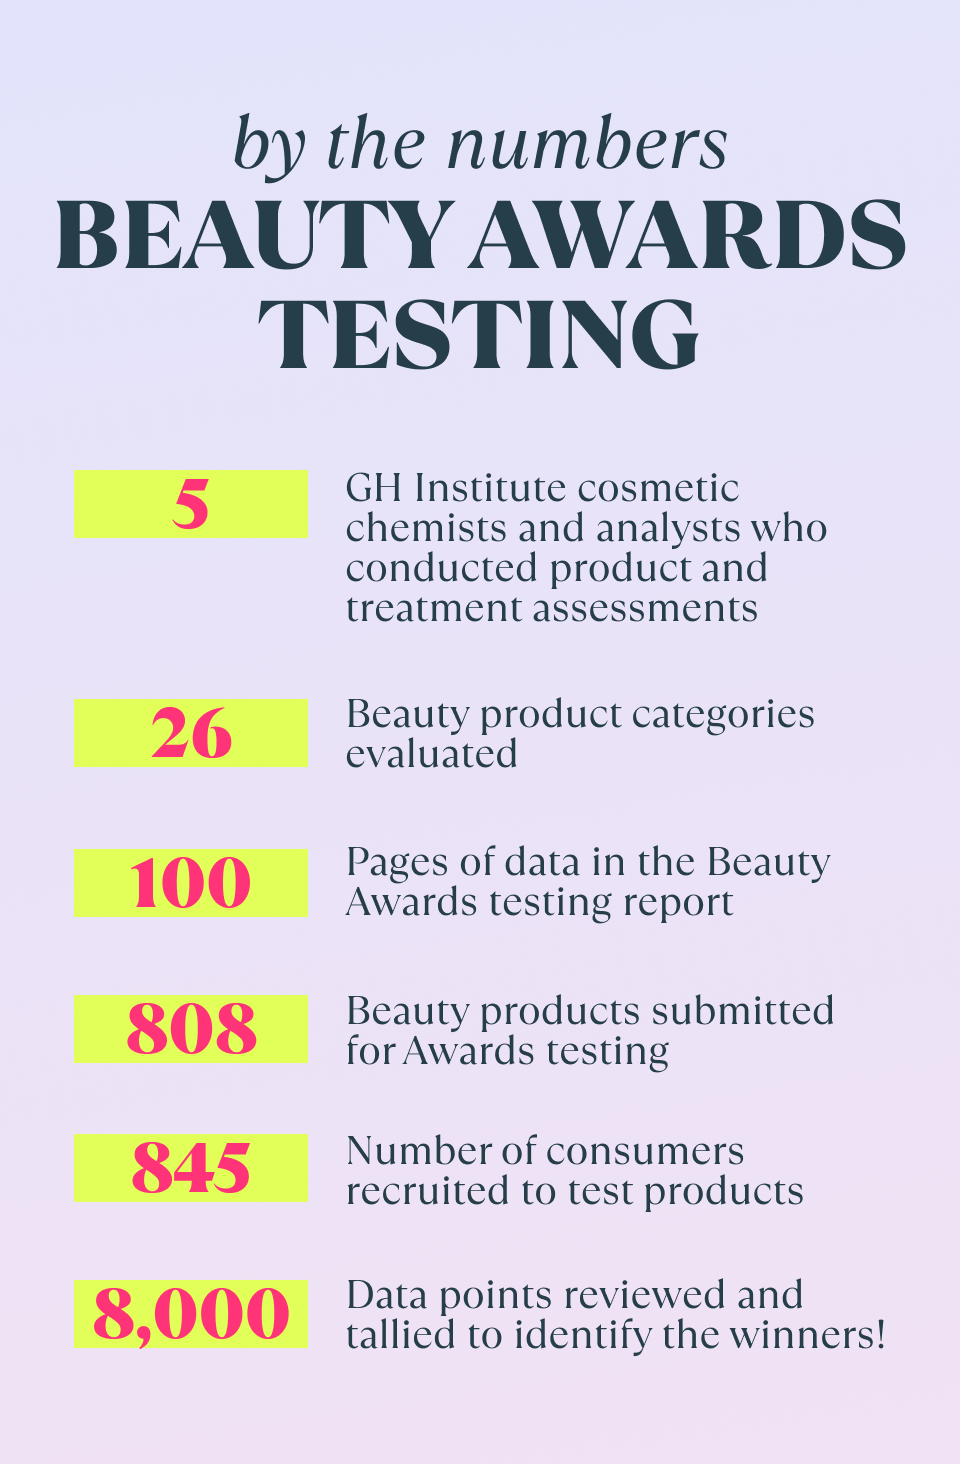 5 gh institute cosmetic chemists and analysts who conducted product and treatment assessments 26 beauty product categories evaluated 100 pages of data in the beauty awards testing report 808 beauty products submitted for awards testing 845 number of consumers recruited to test products 8000 data points reviewed and tallied to identify the winners